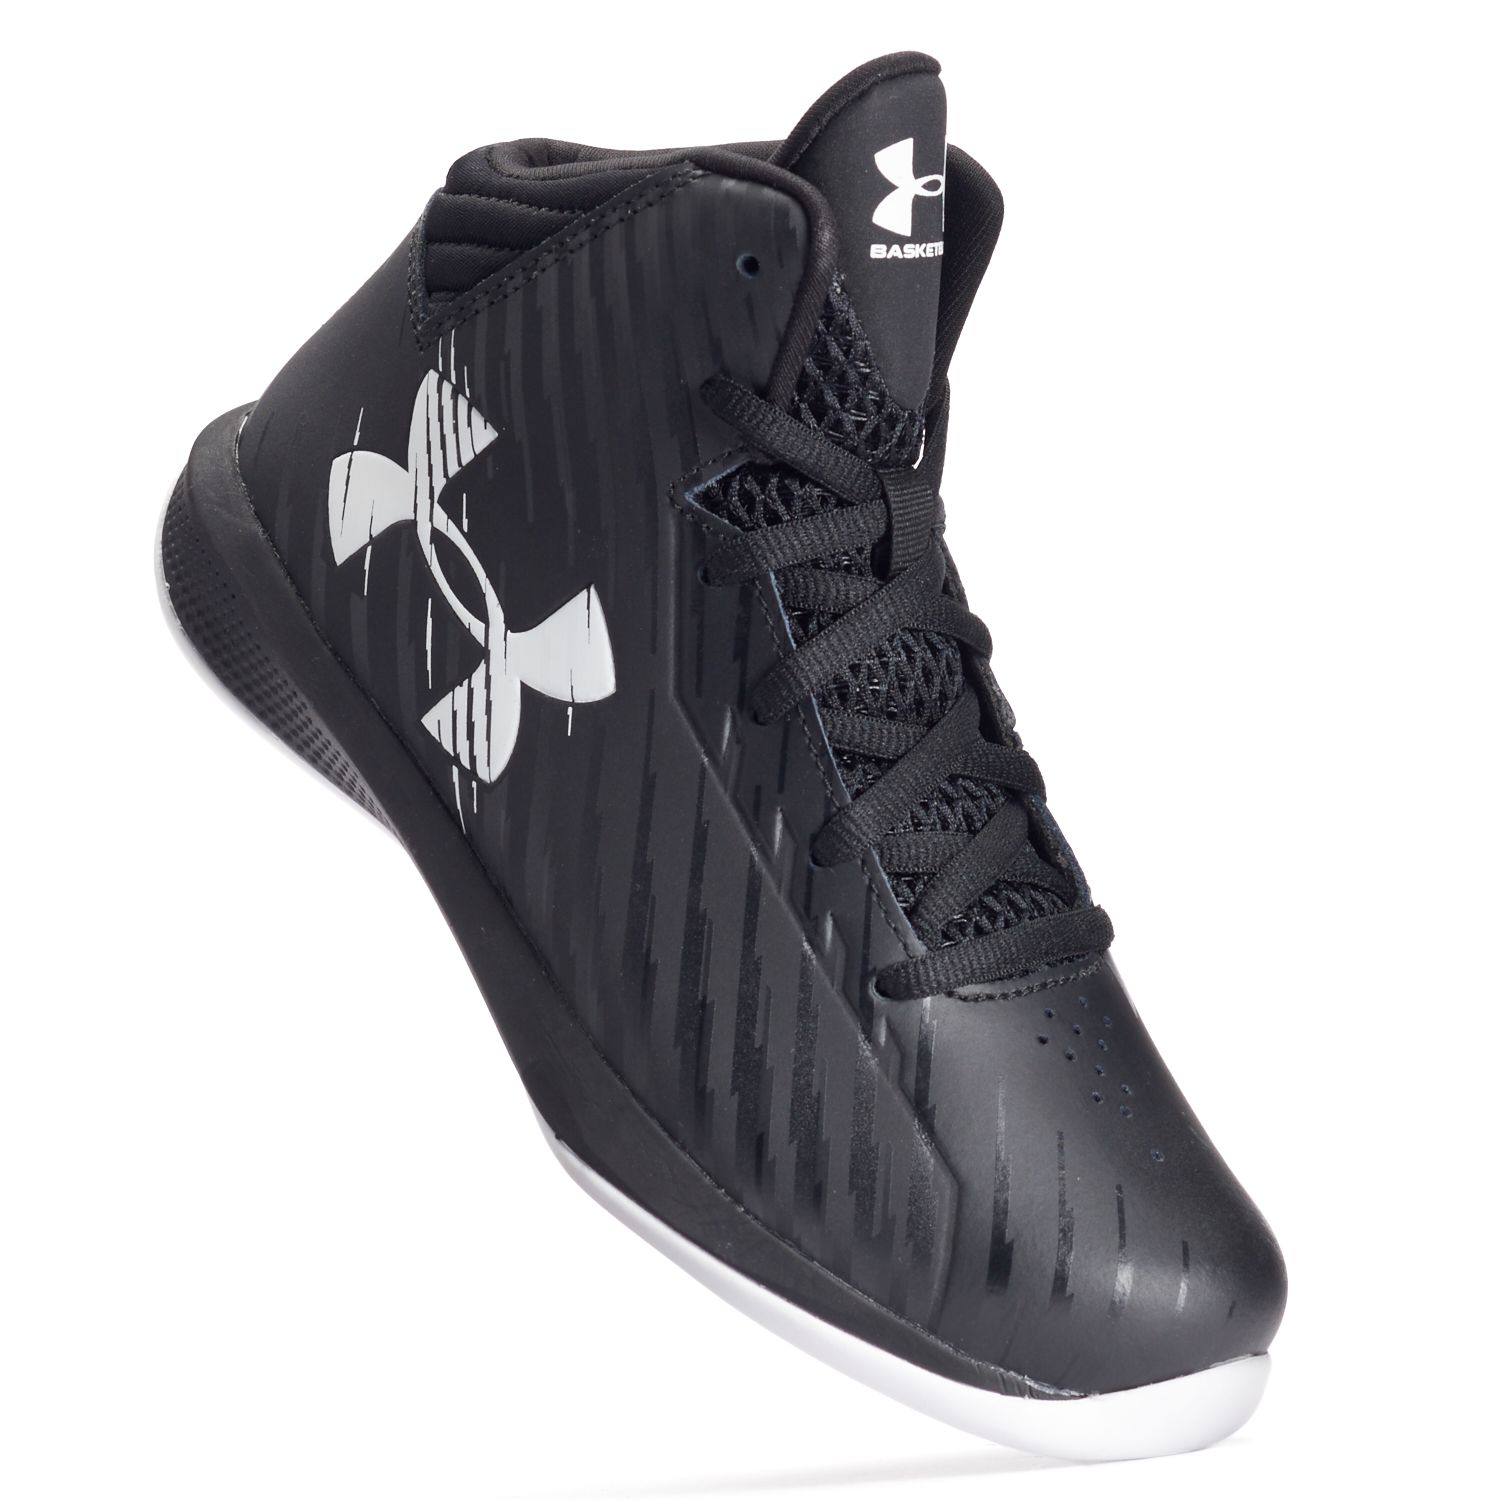 under armour boys high top shoes